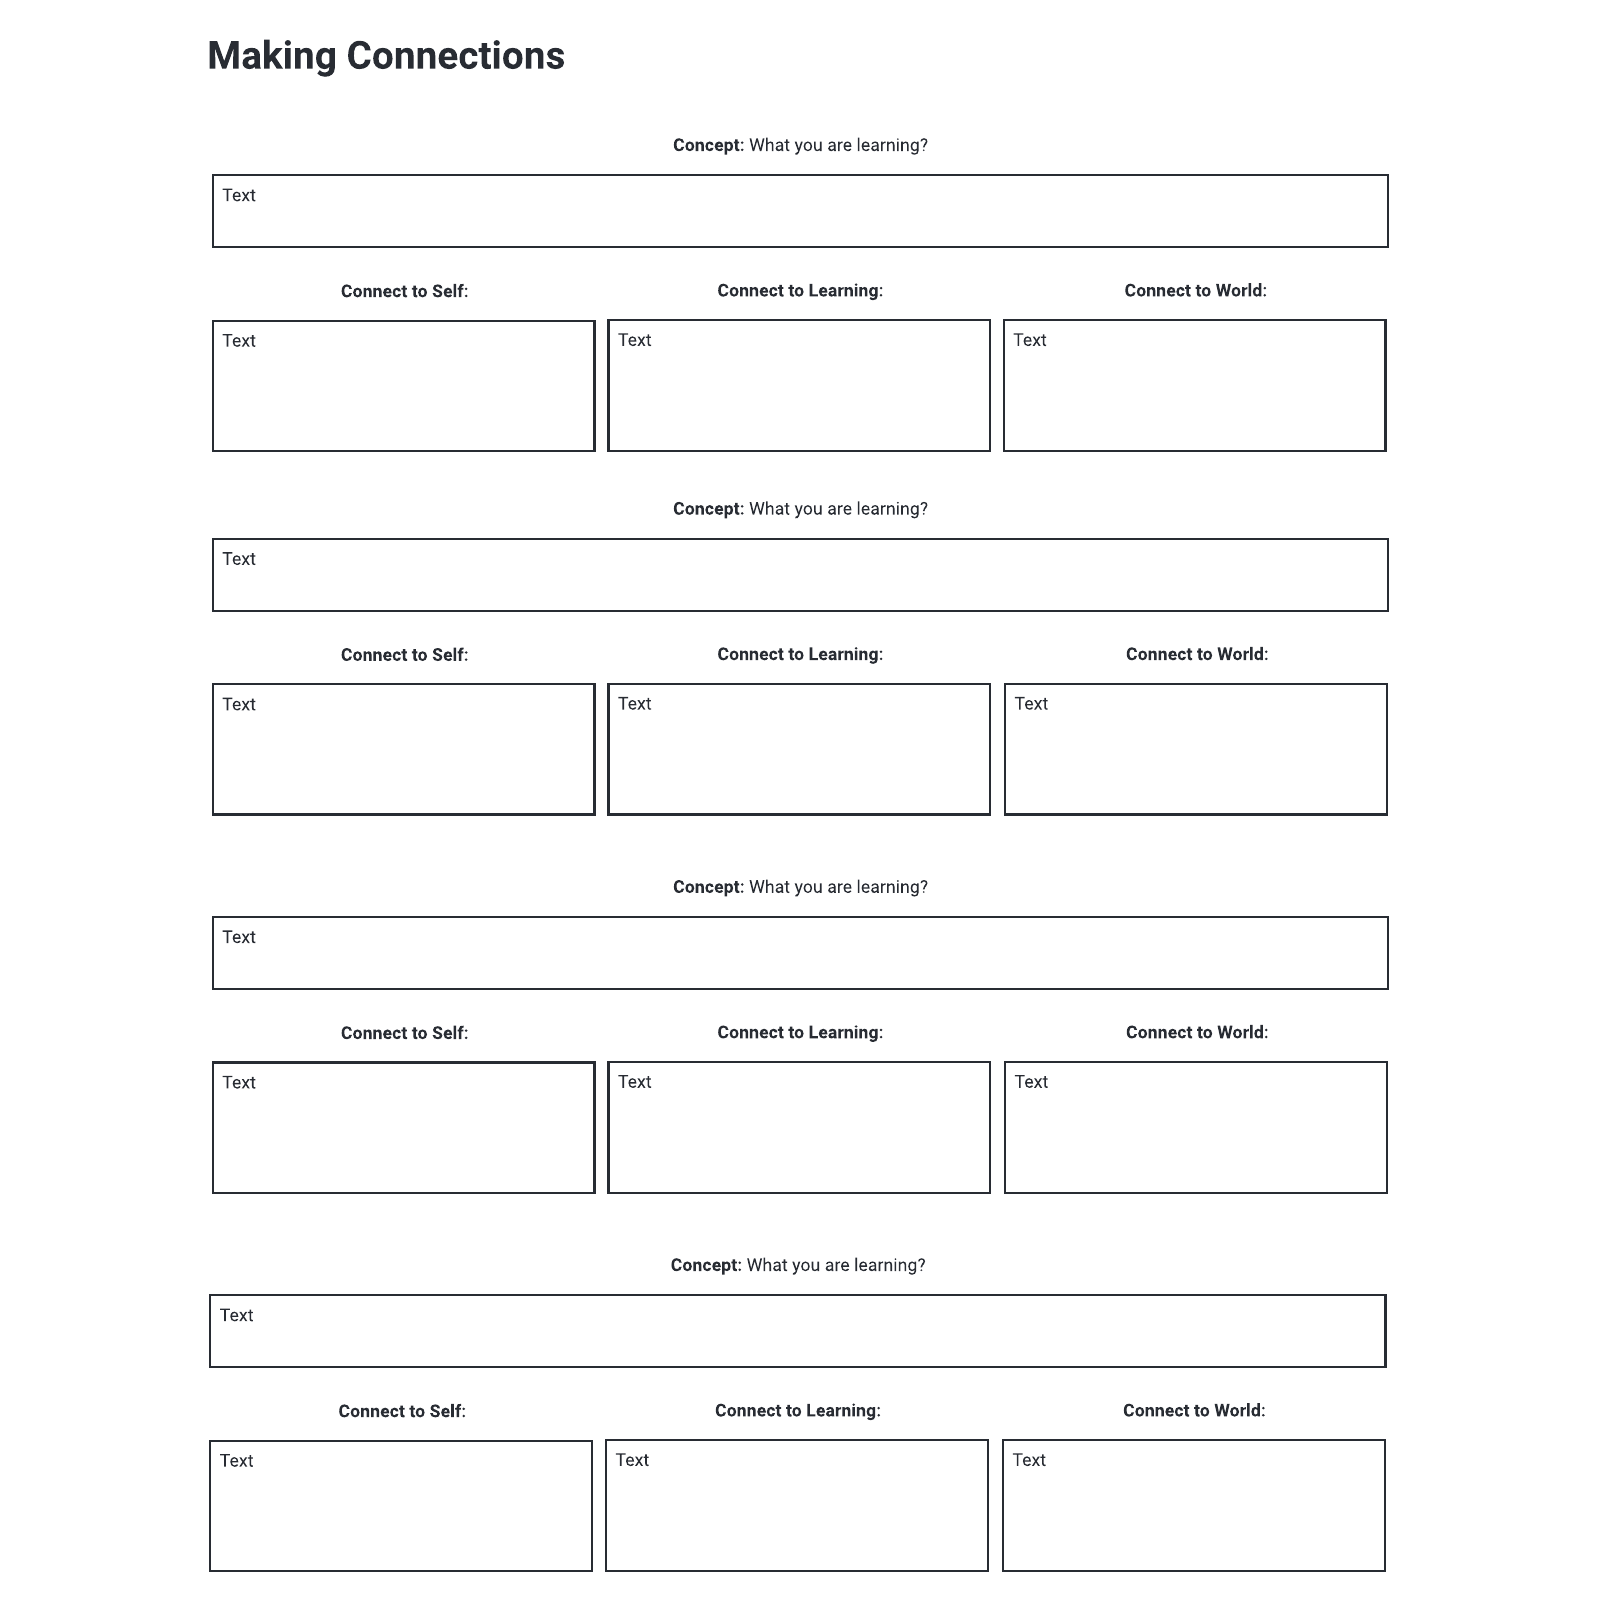 Making connections columns example